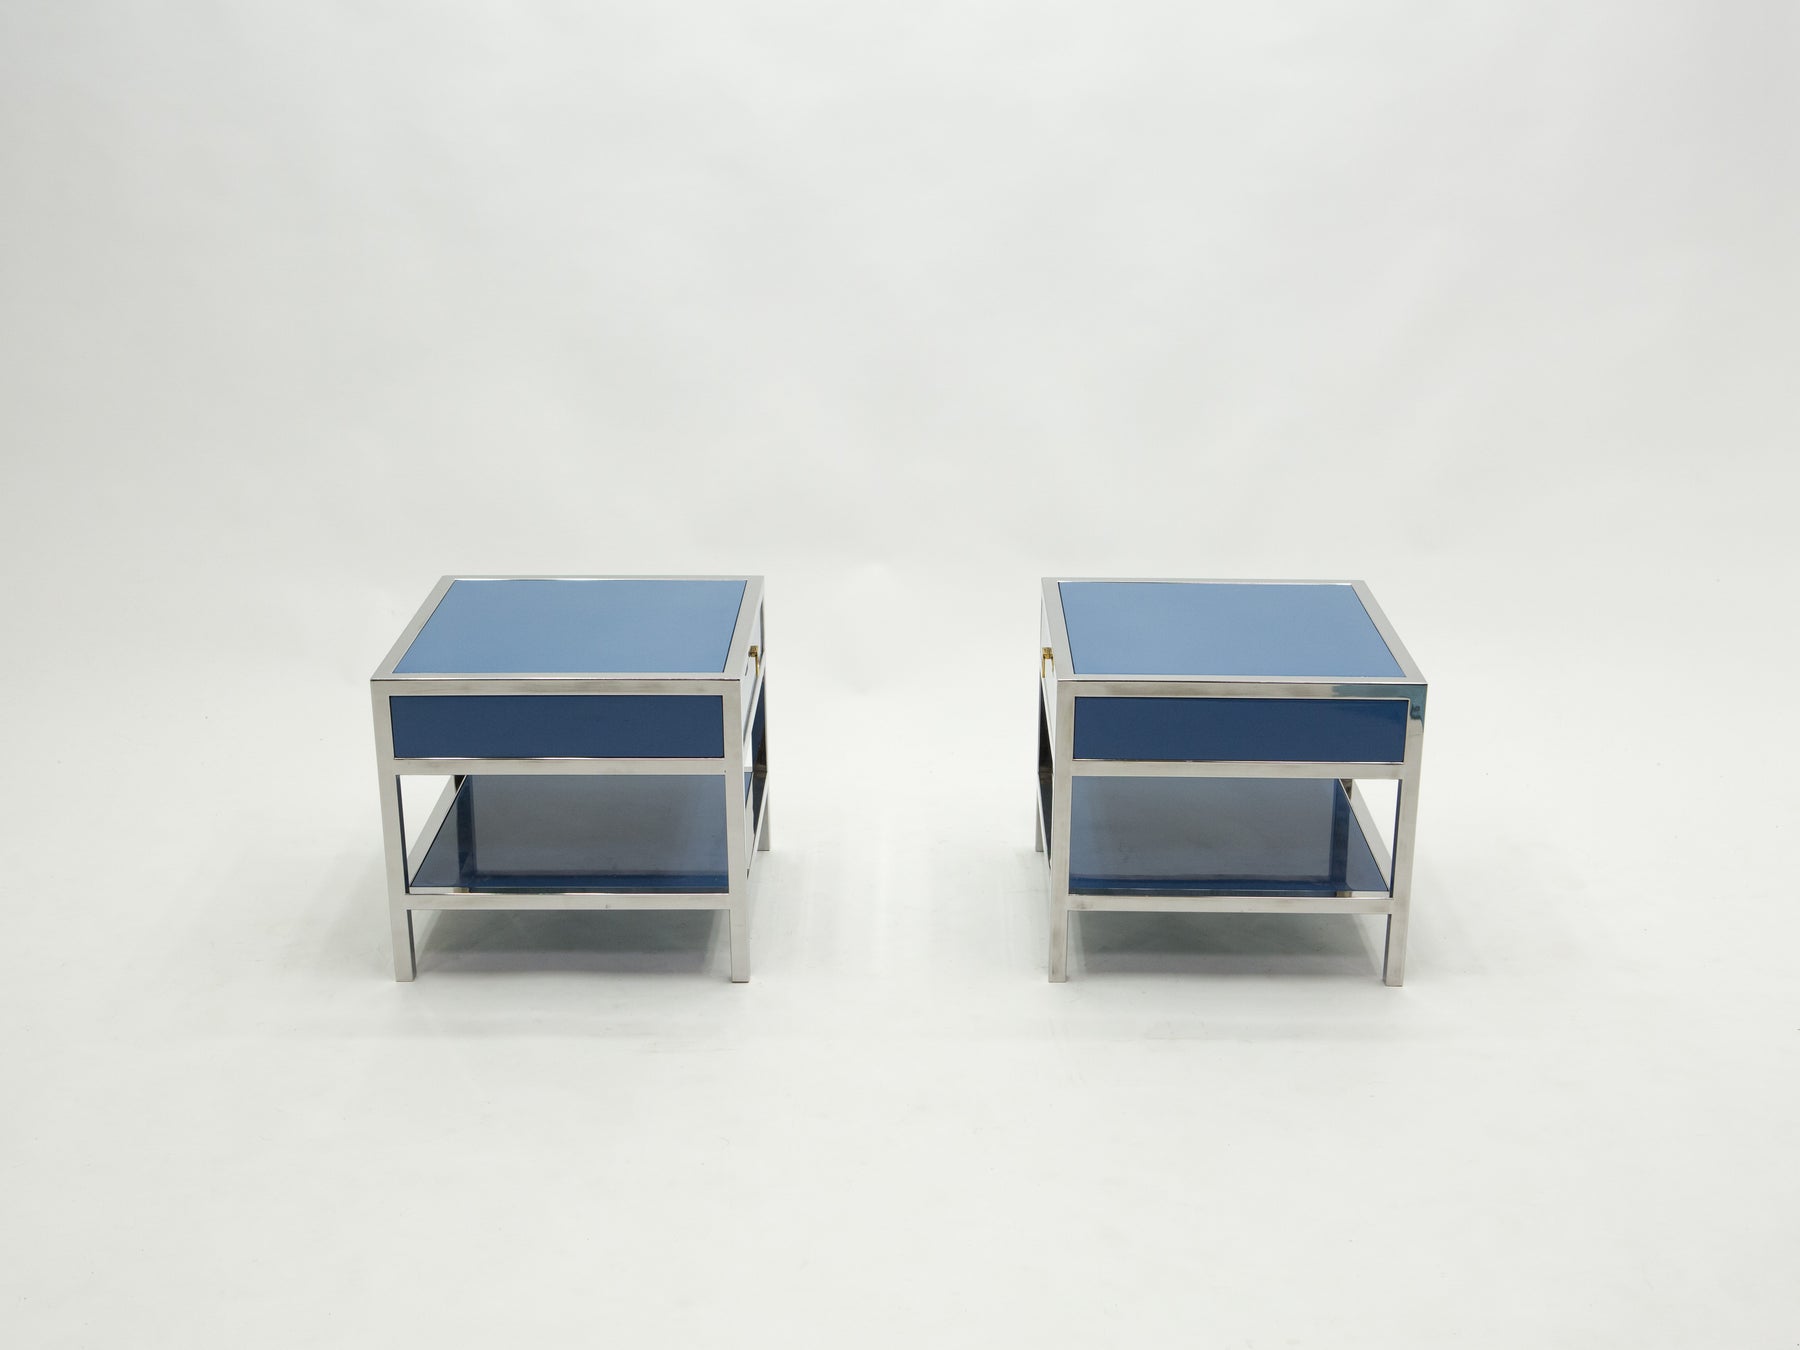 Pair of lacquered chrome brass Nightstands by Guy Lefevre 1970s